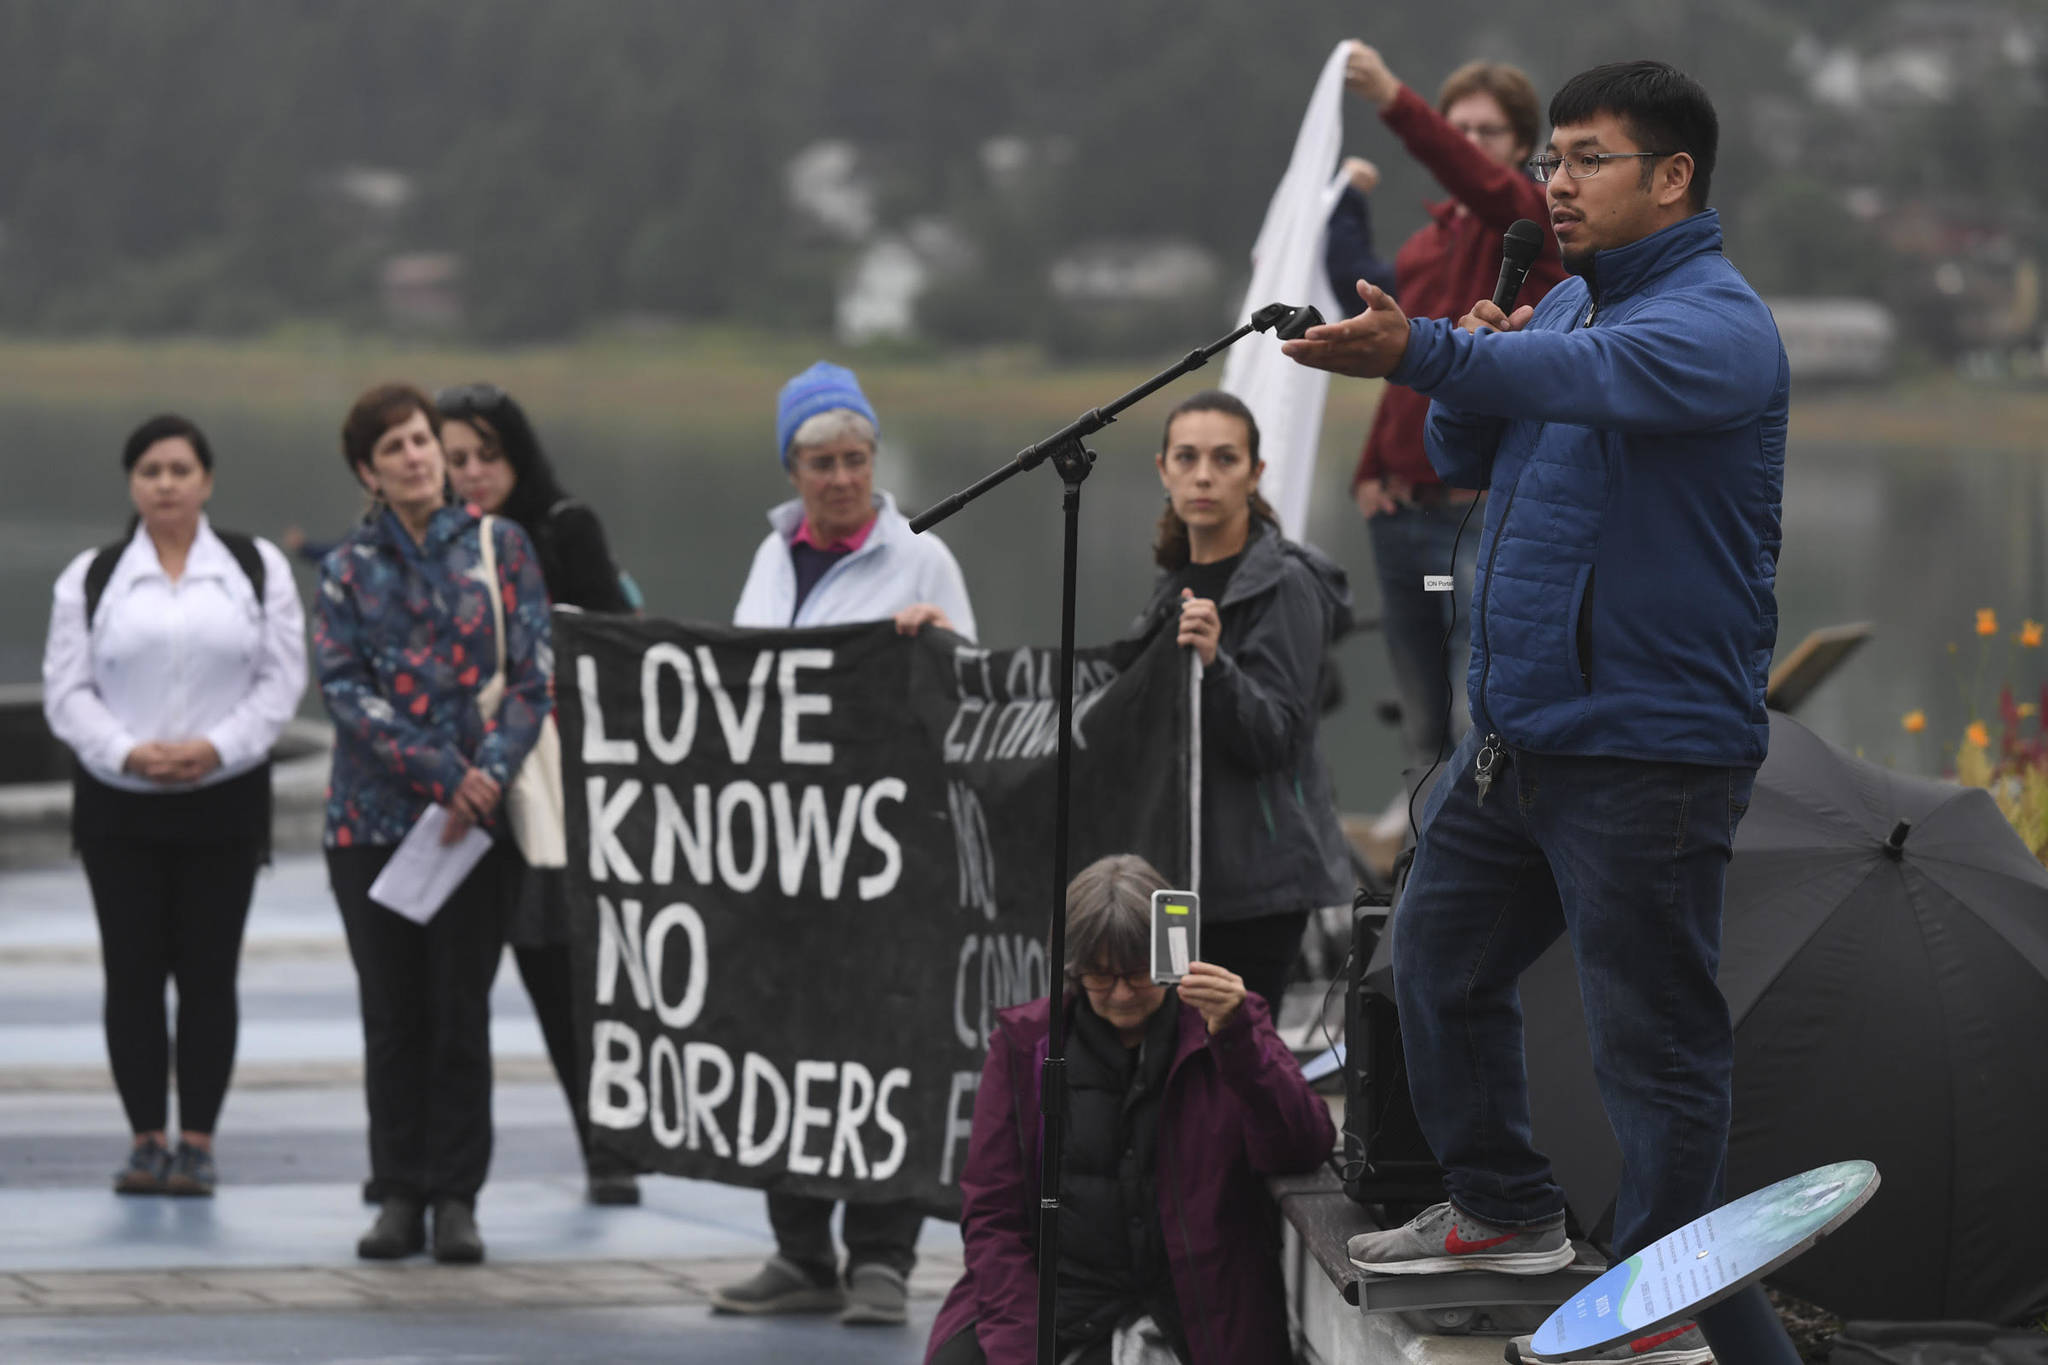 Speakers in Juneau host a rally denouncing immigrant detention facilities Friday, July 12, 2019. (Michael Penn | Juneau Empire)